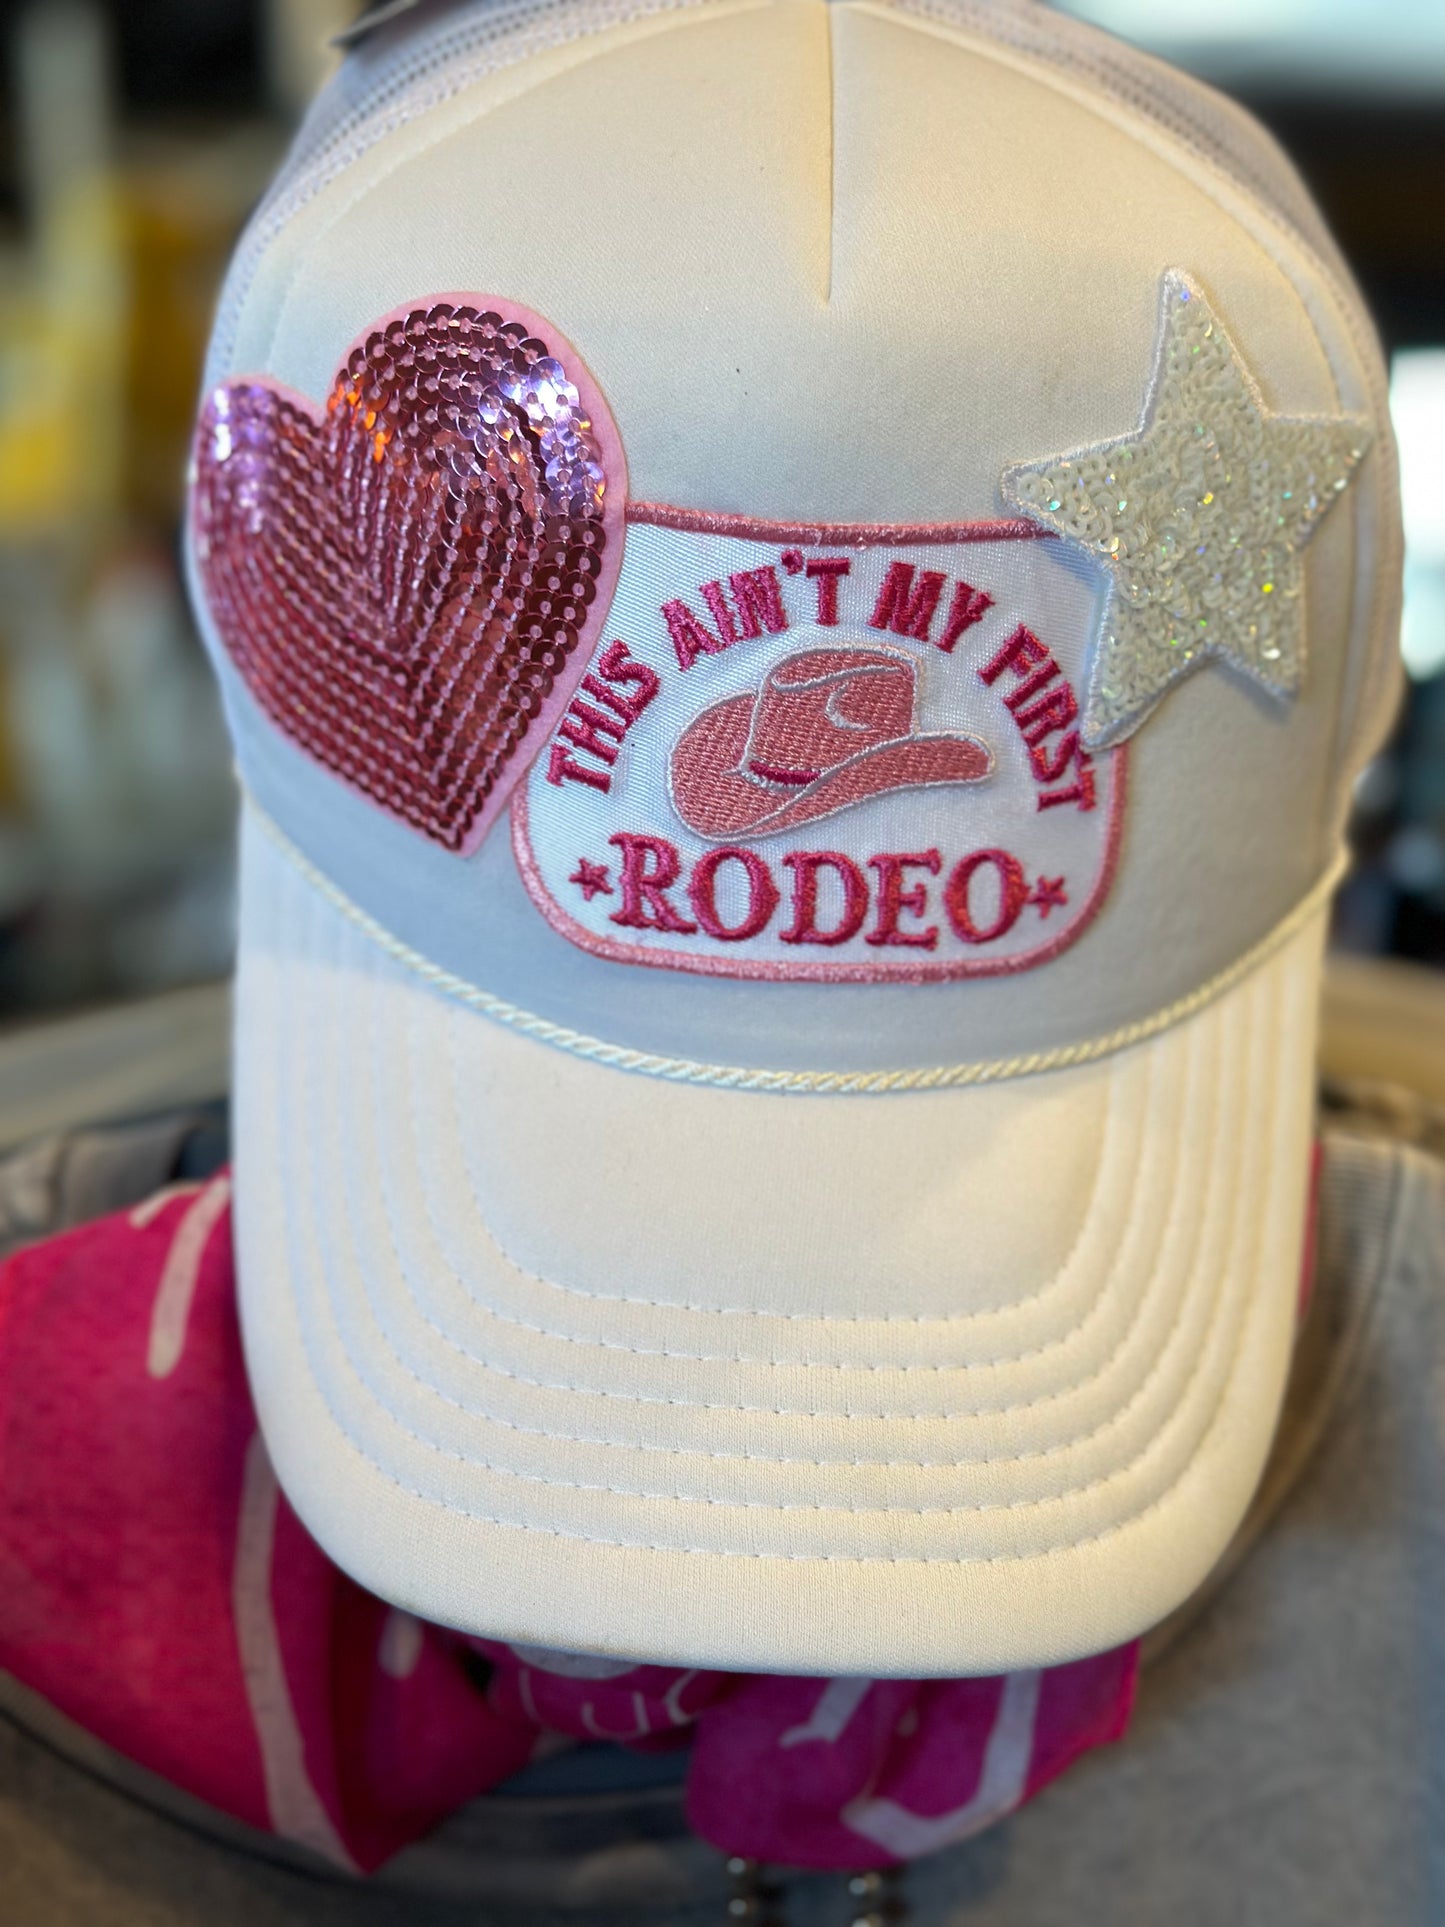 This ain't my 1st rodeo hat